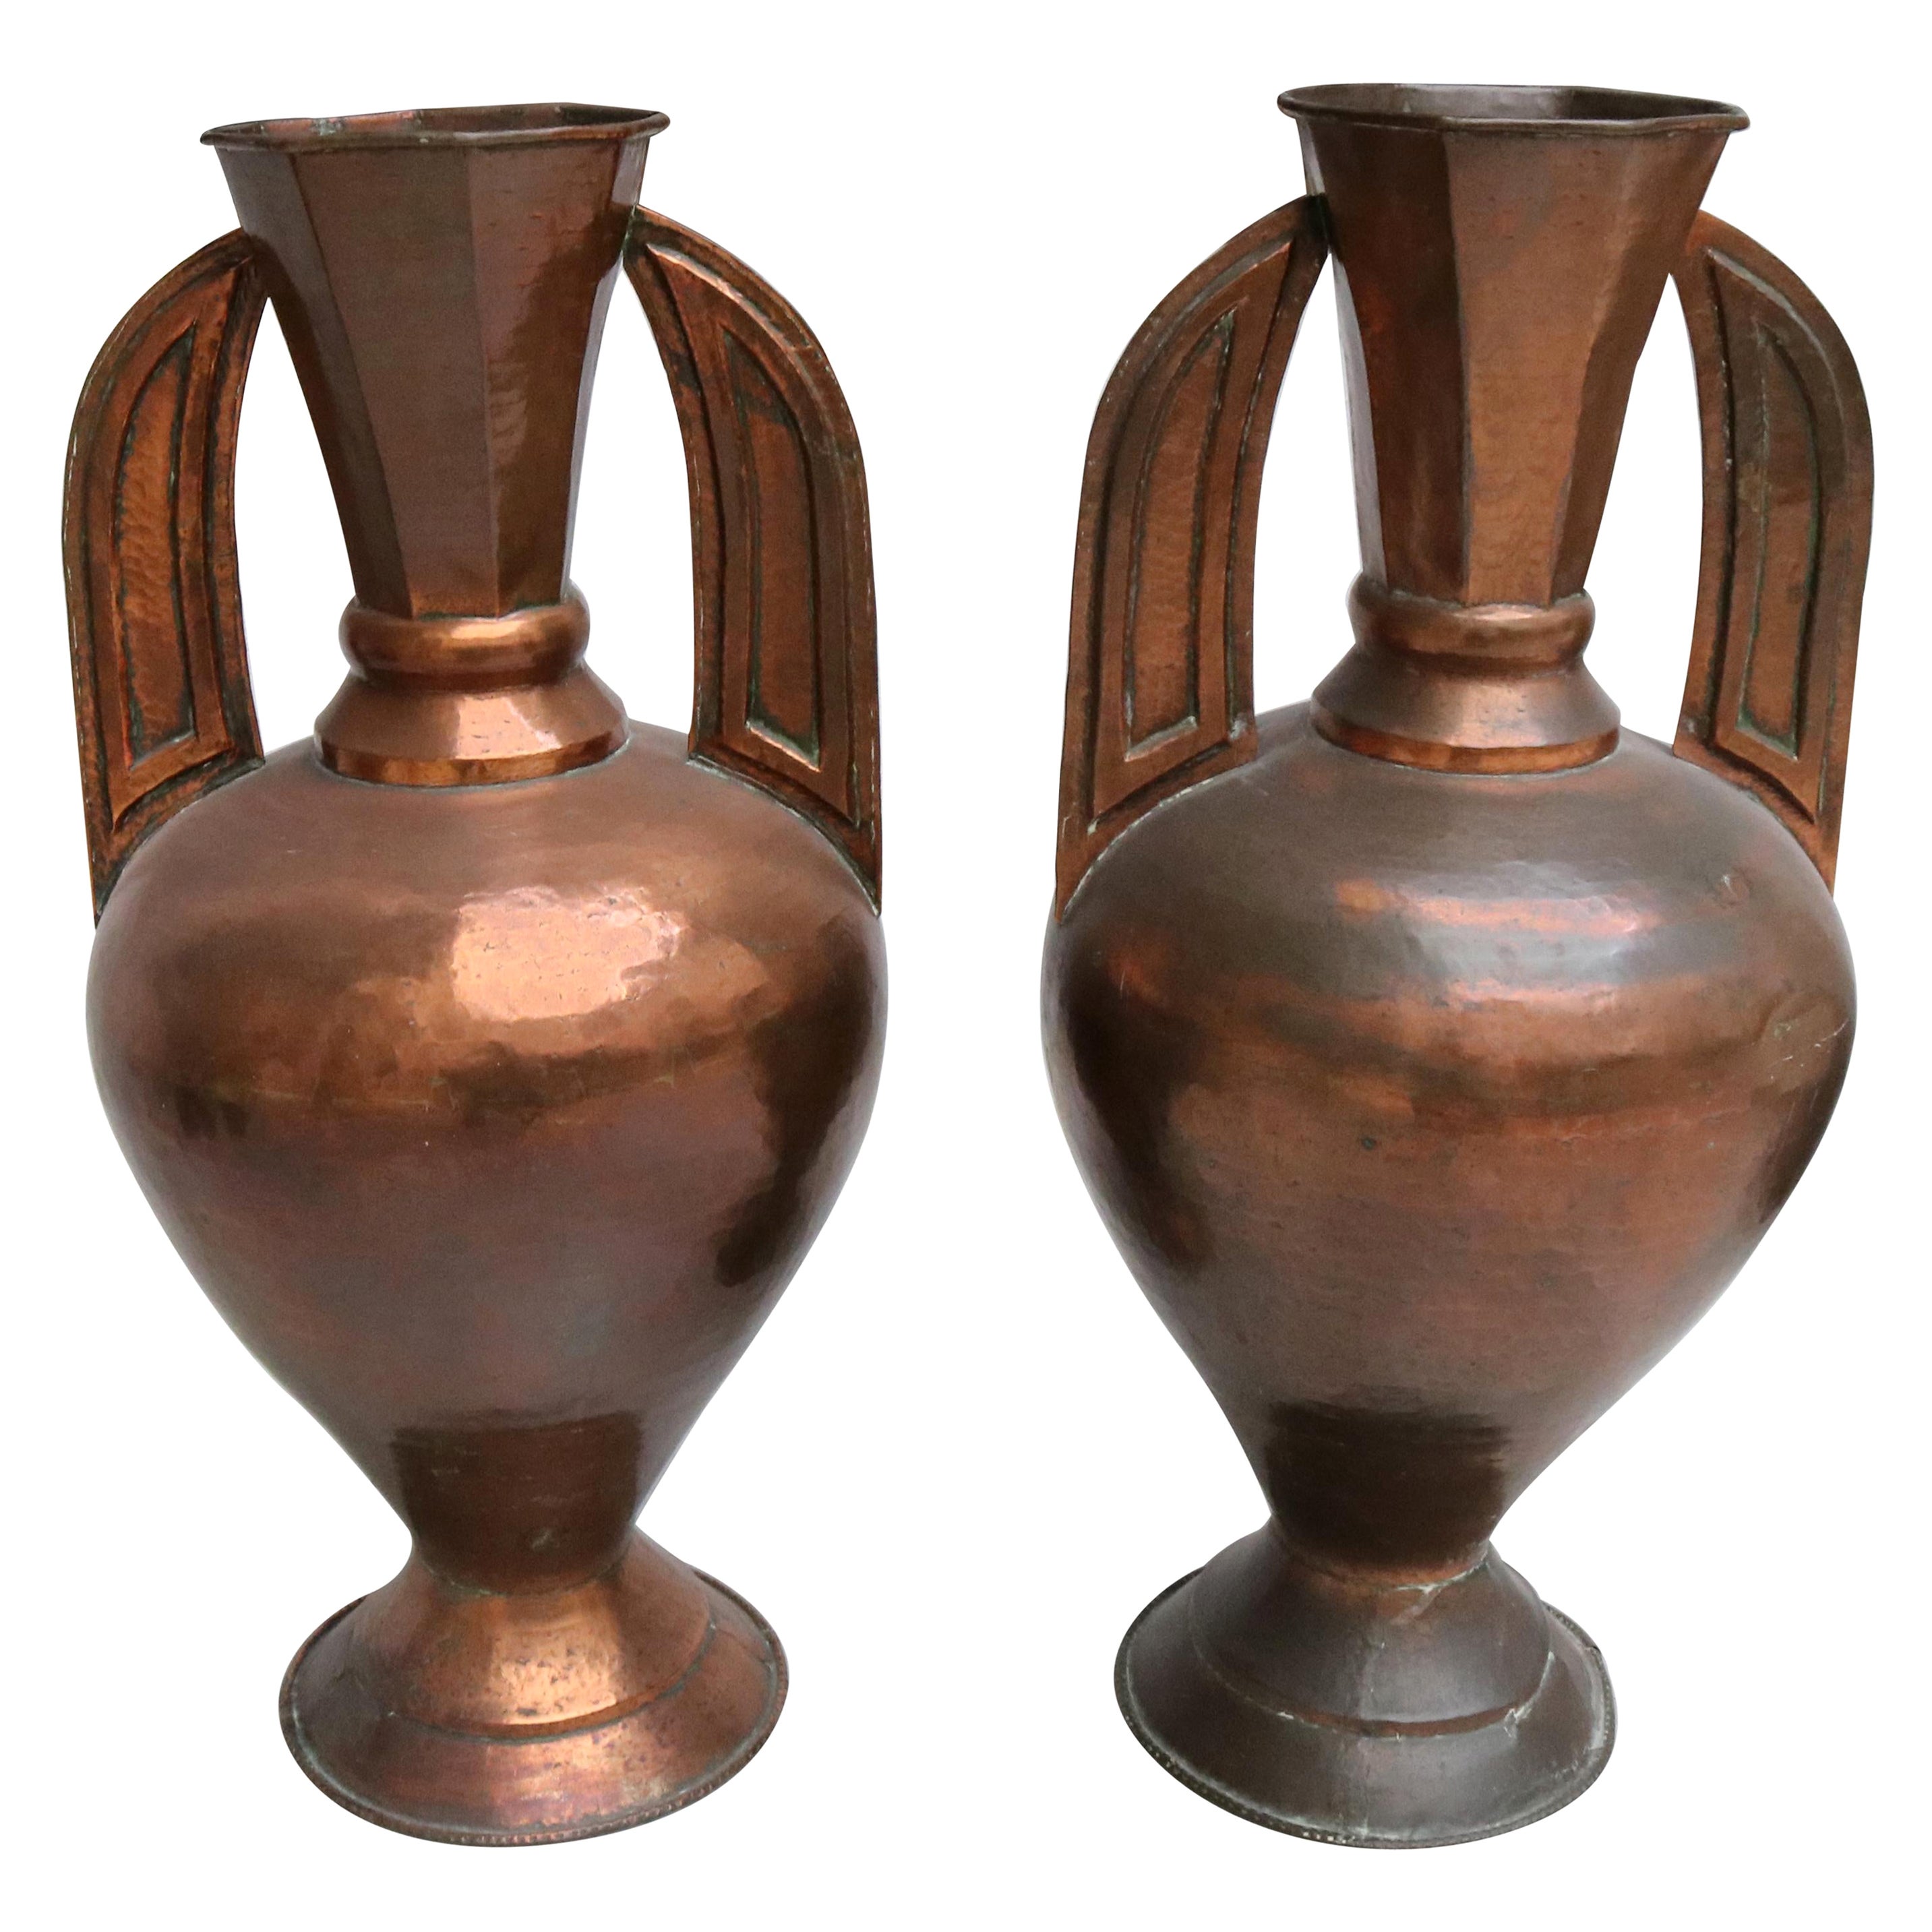 1950 Pair of Spanish "Alhambra" Style Copper Vases with Handles